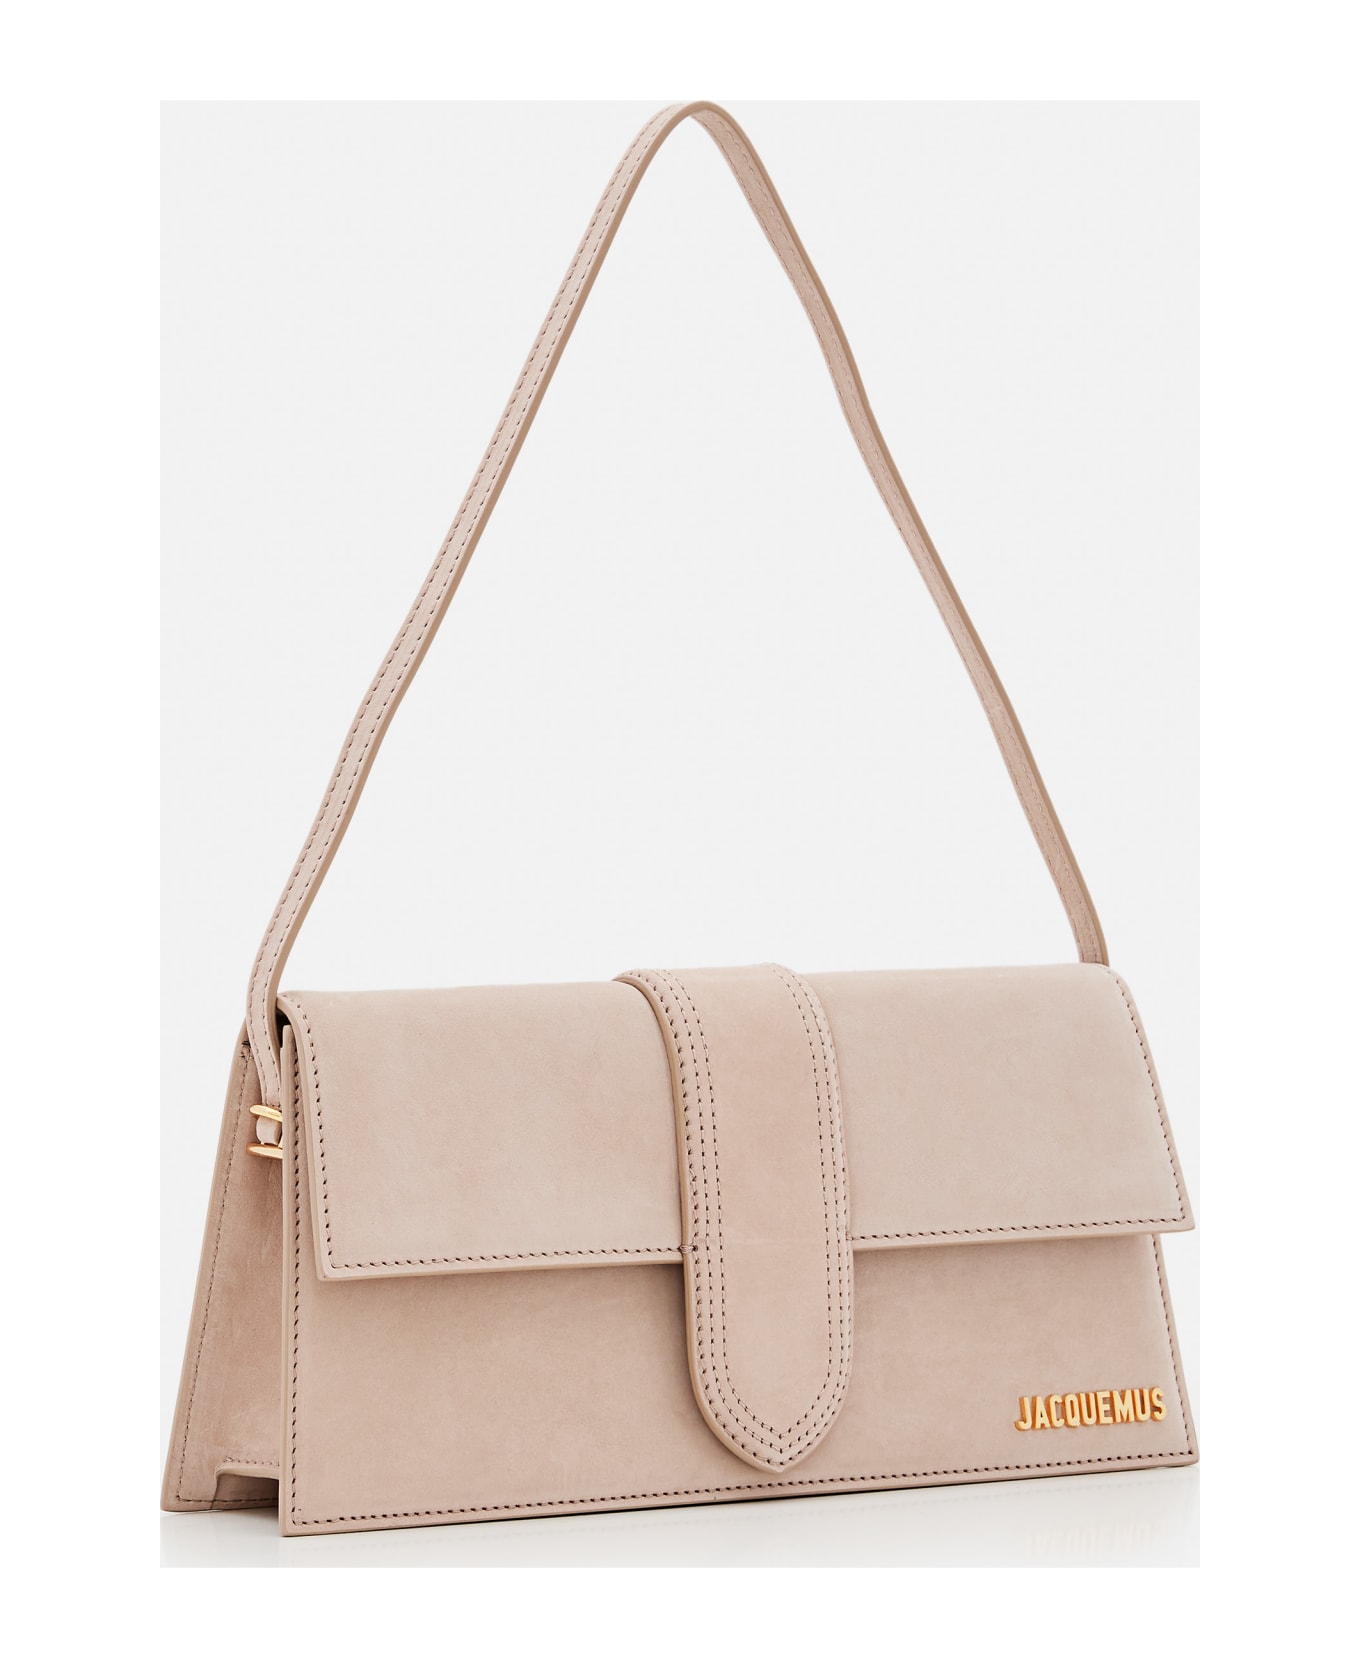 Jacquemus Le Bambino Leather Shoulder Bag - Beige ショルダーバッグ